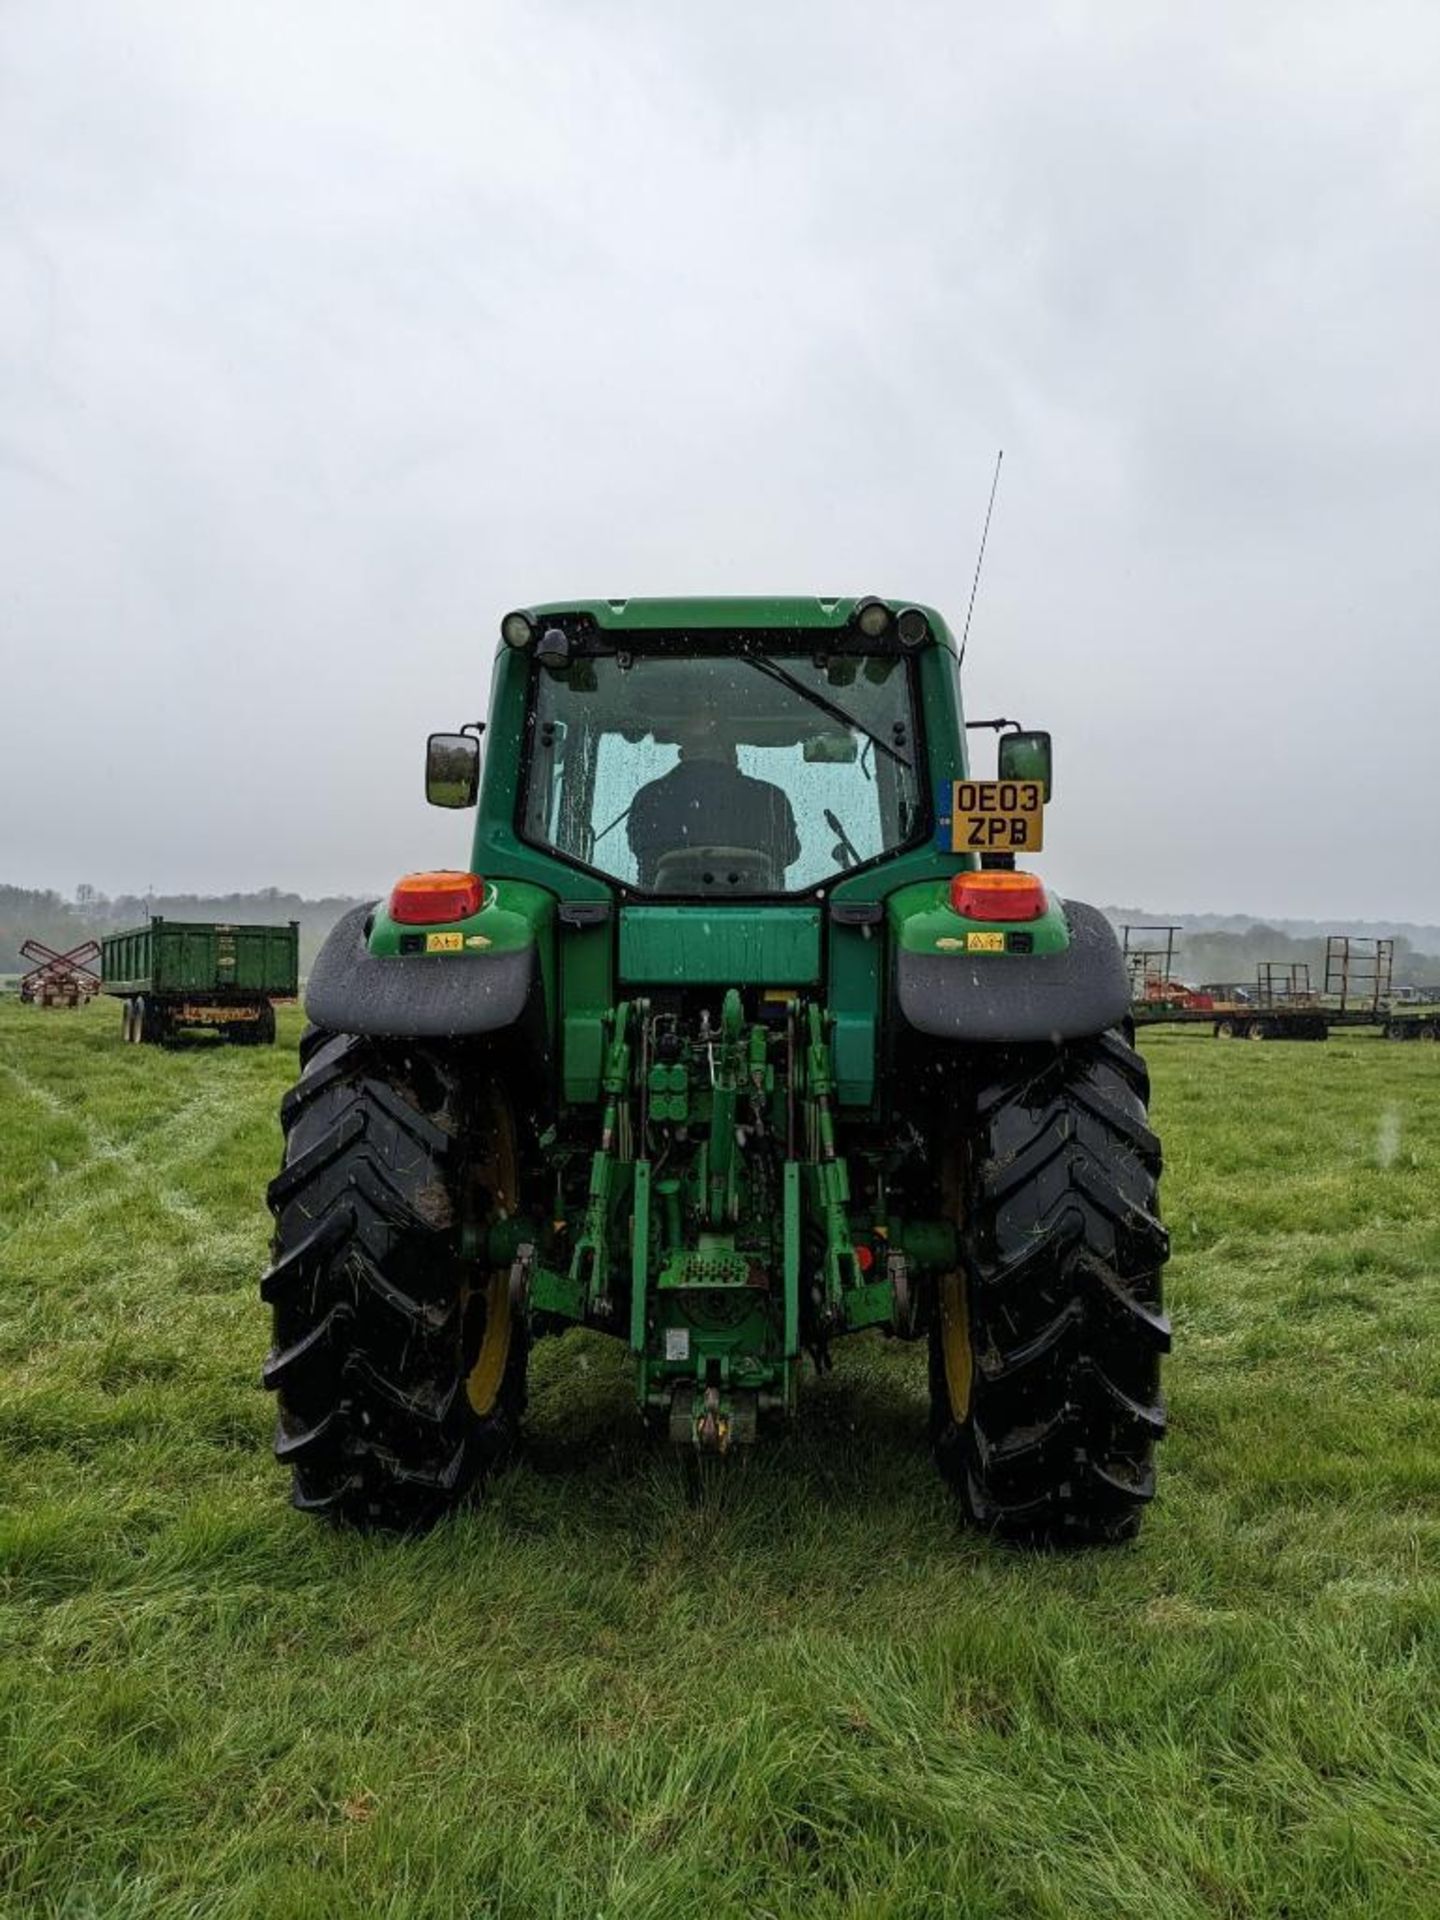 2003 John Deere 6620, 4wd, front wafer weights, 2 spools. Reg: OEO3 ZPB. Hours: 6,900 - Image 7 of 8